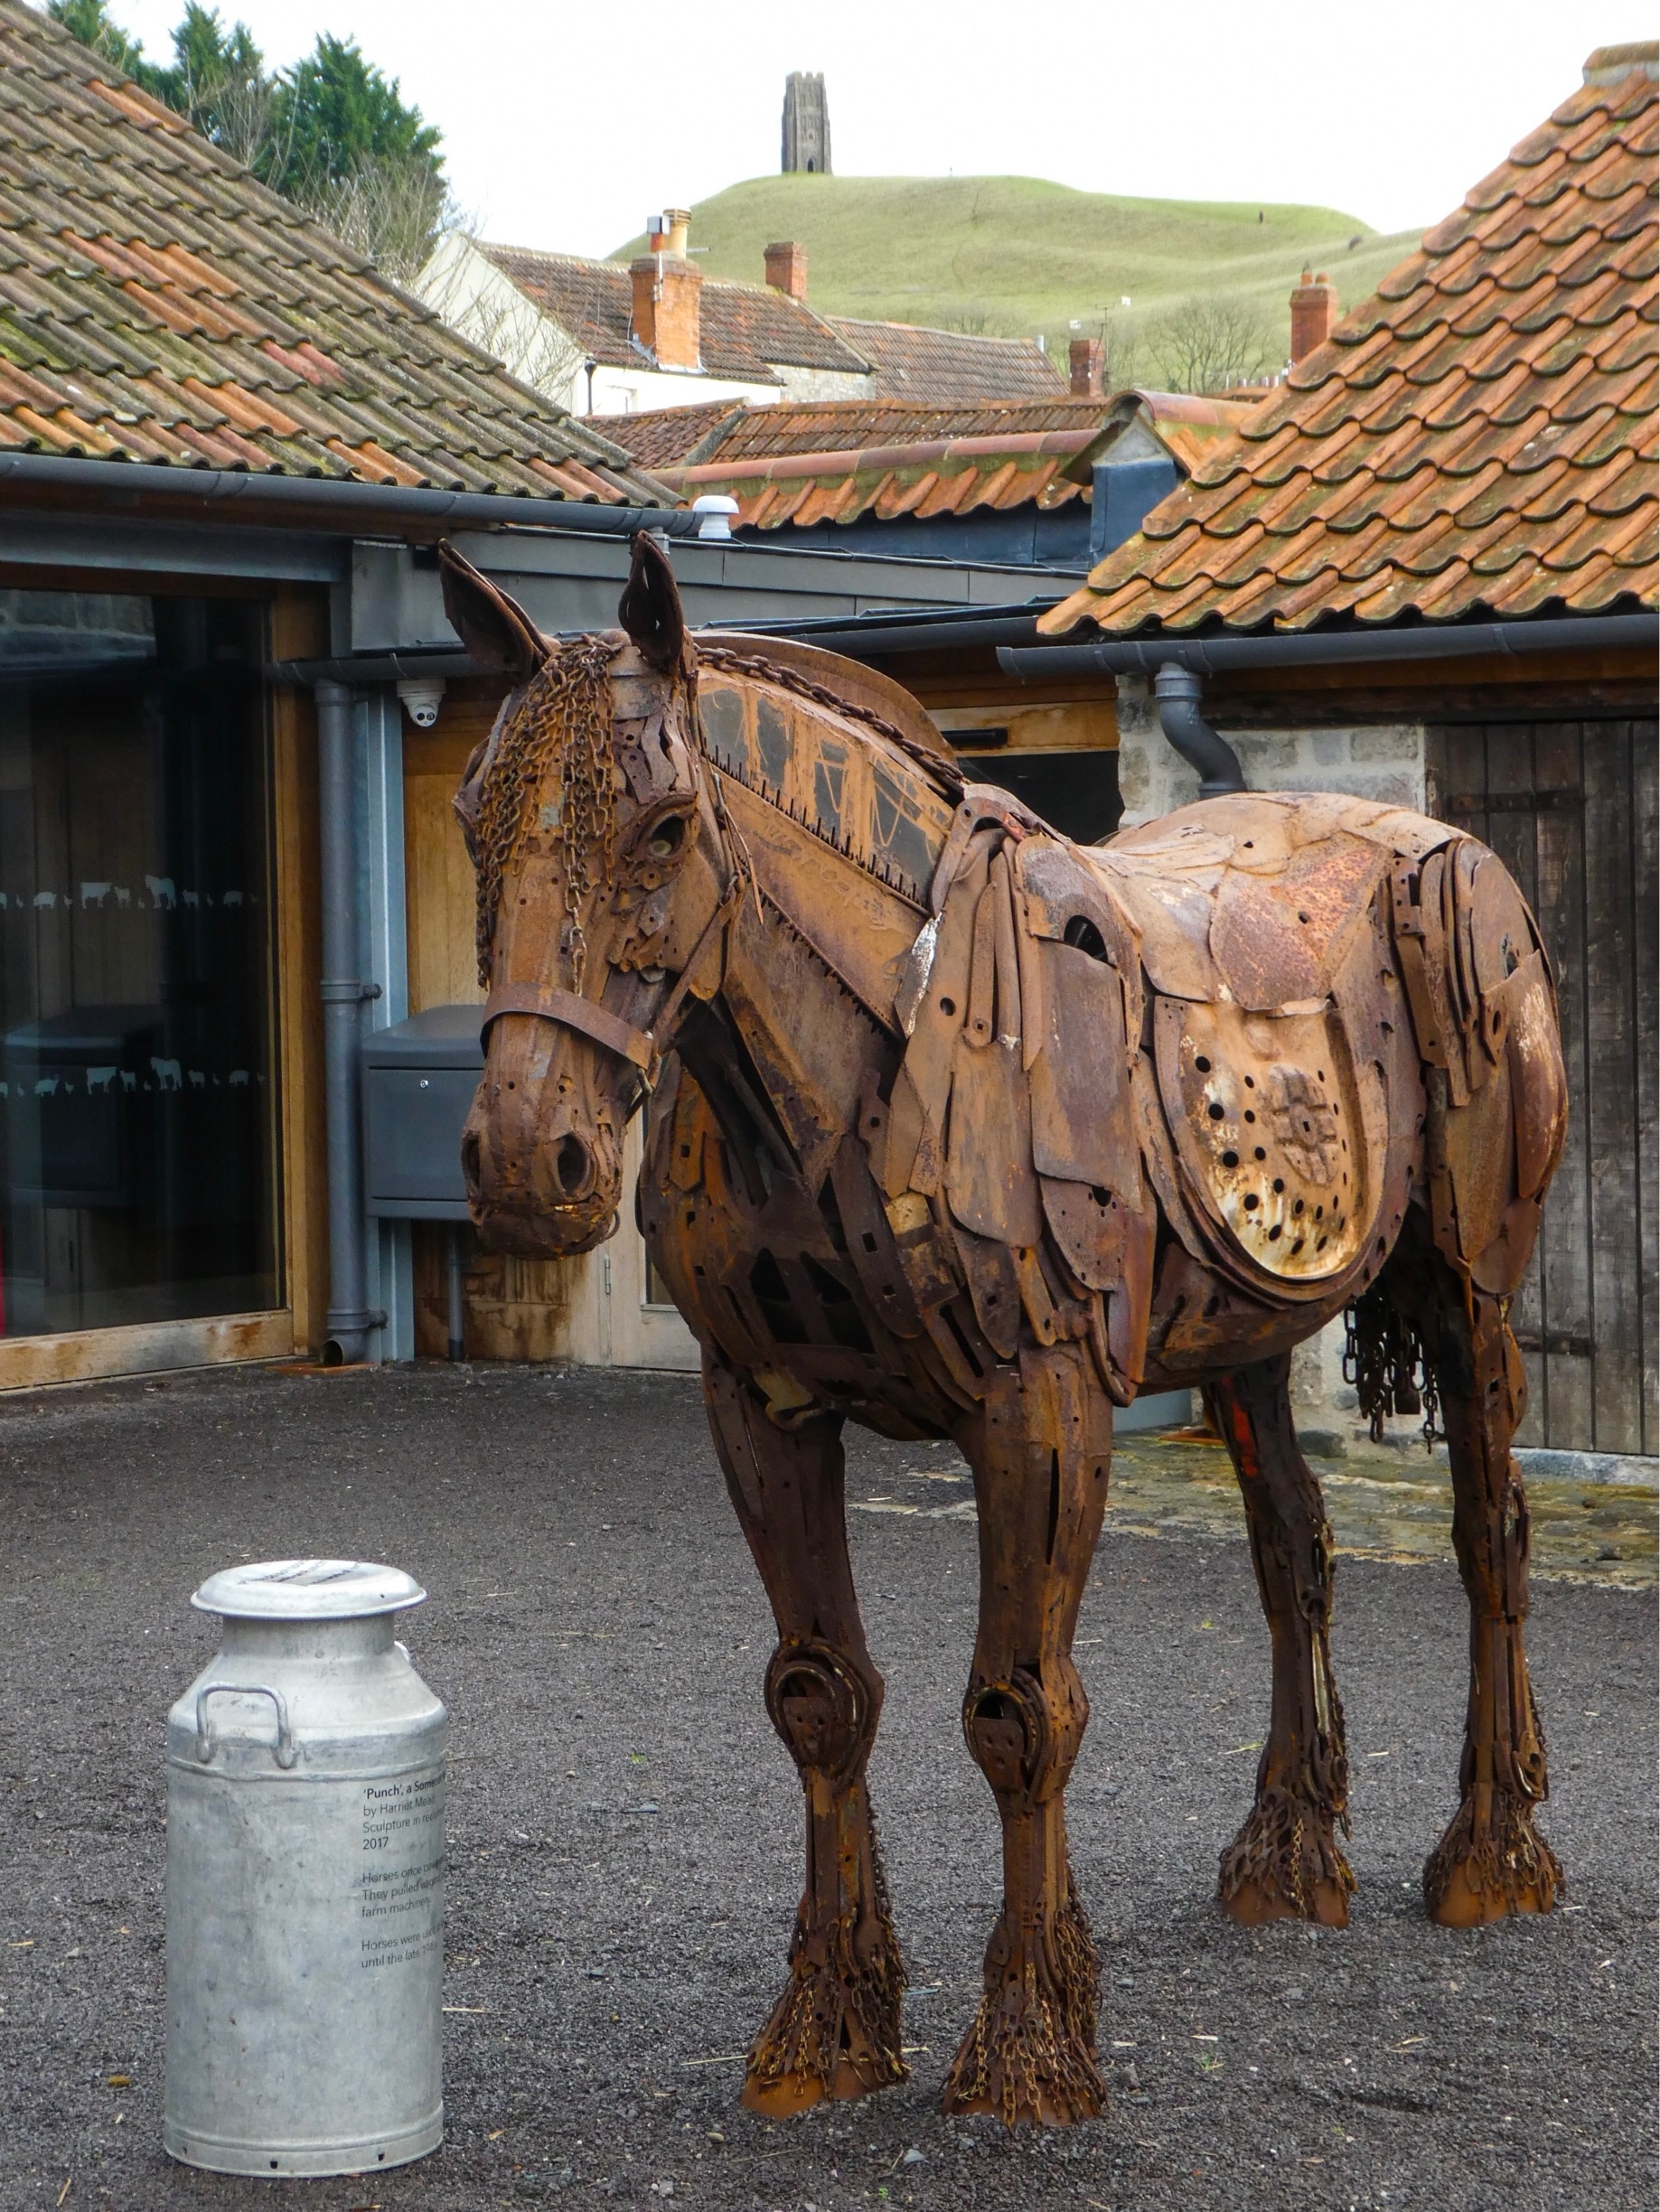 Very interesting museum devoted to Rural Life in Somerset and close to Glastonbury Tor and the town centre. This picture depicts one of the exhibits; Captain the horse made from scrap metal.